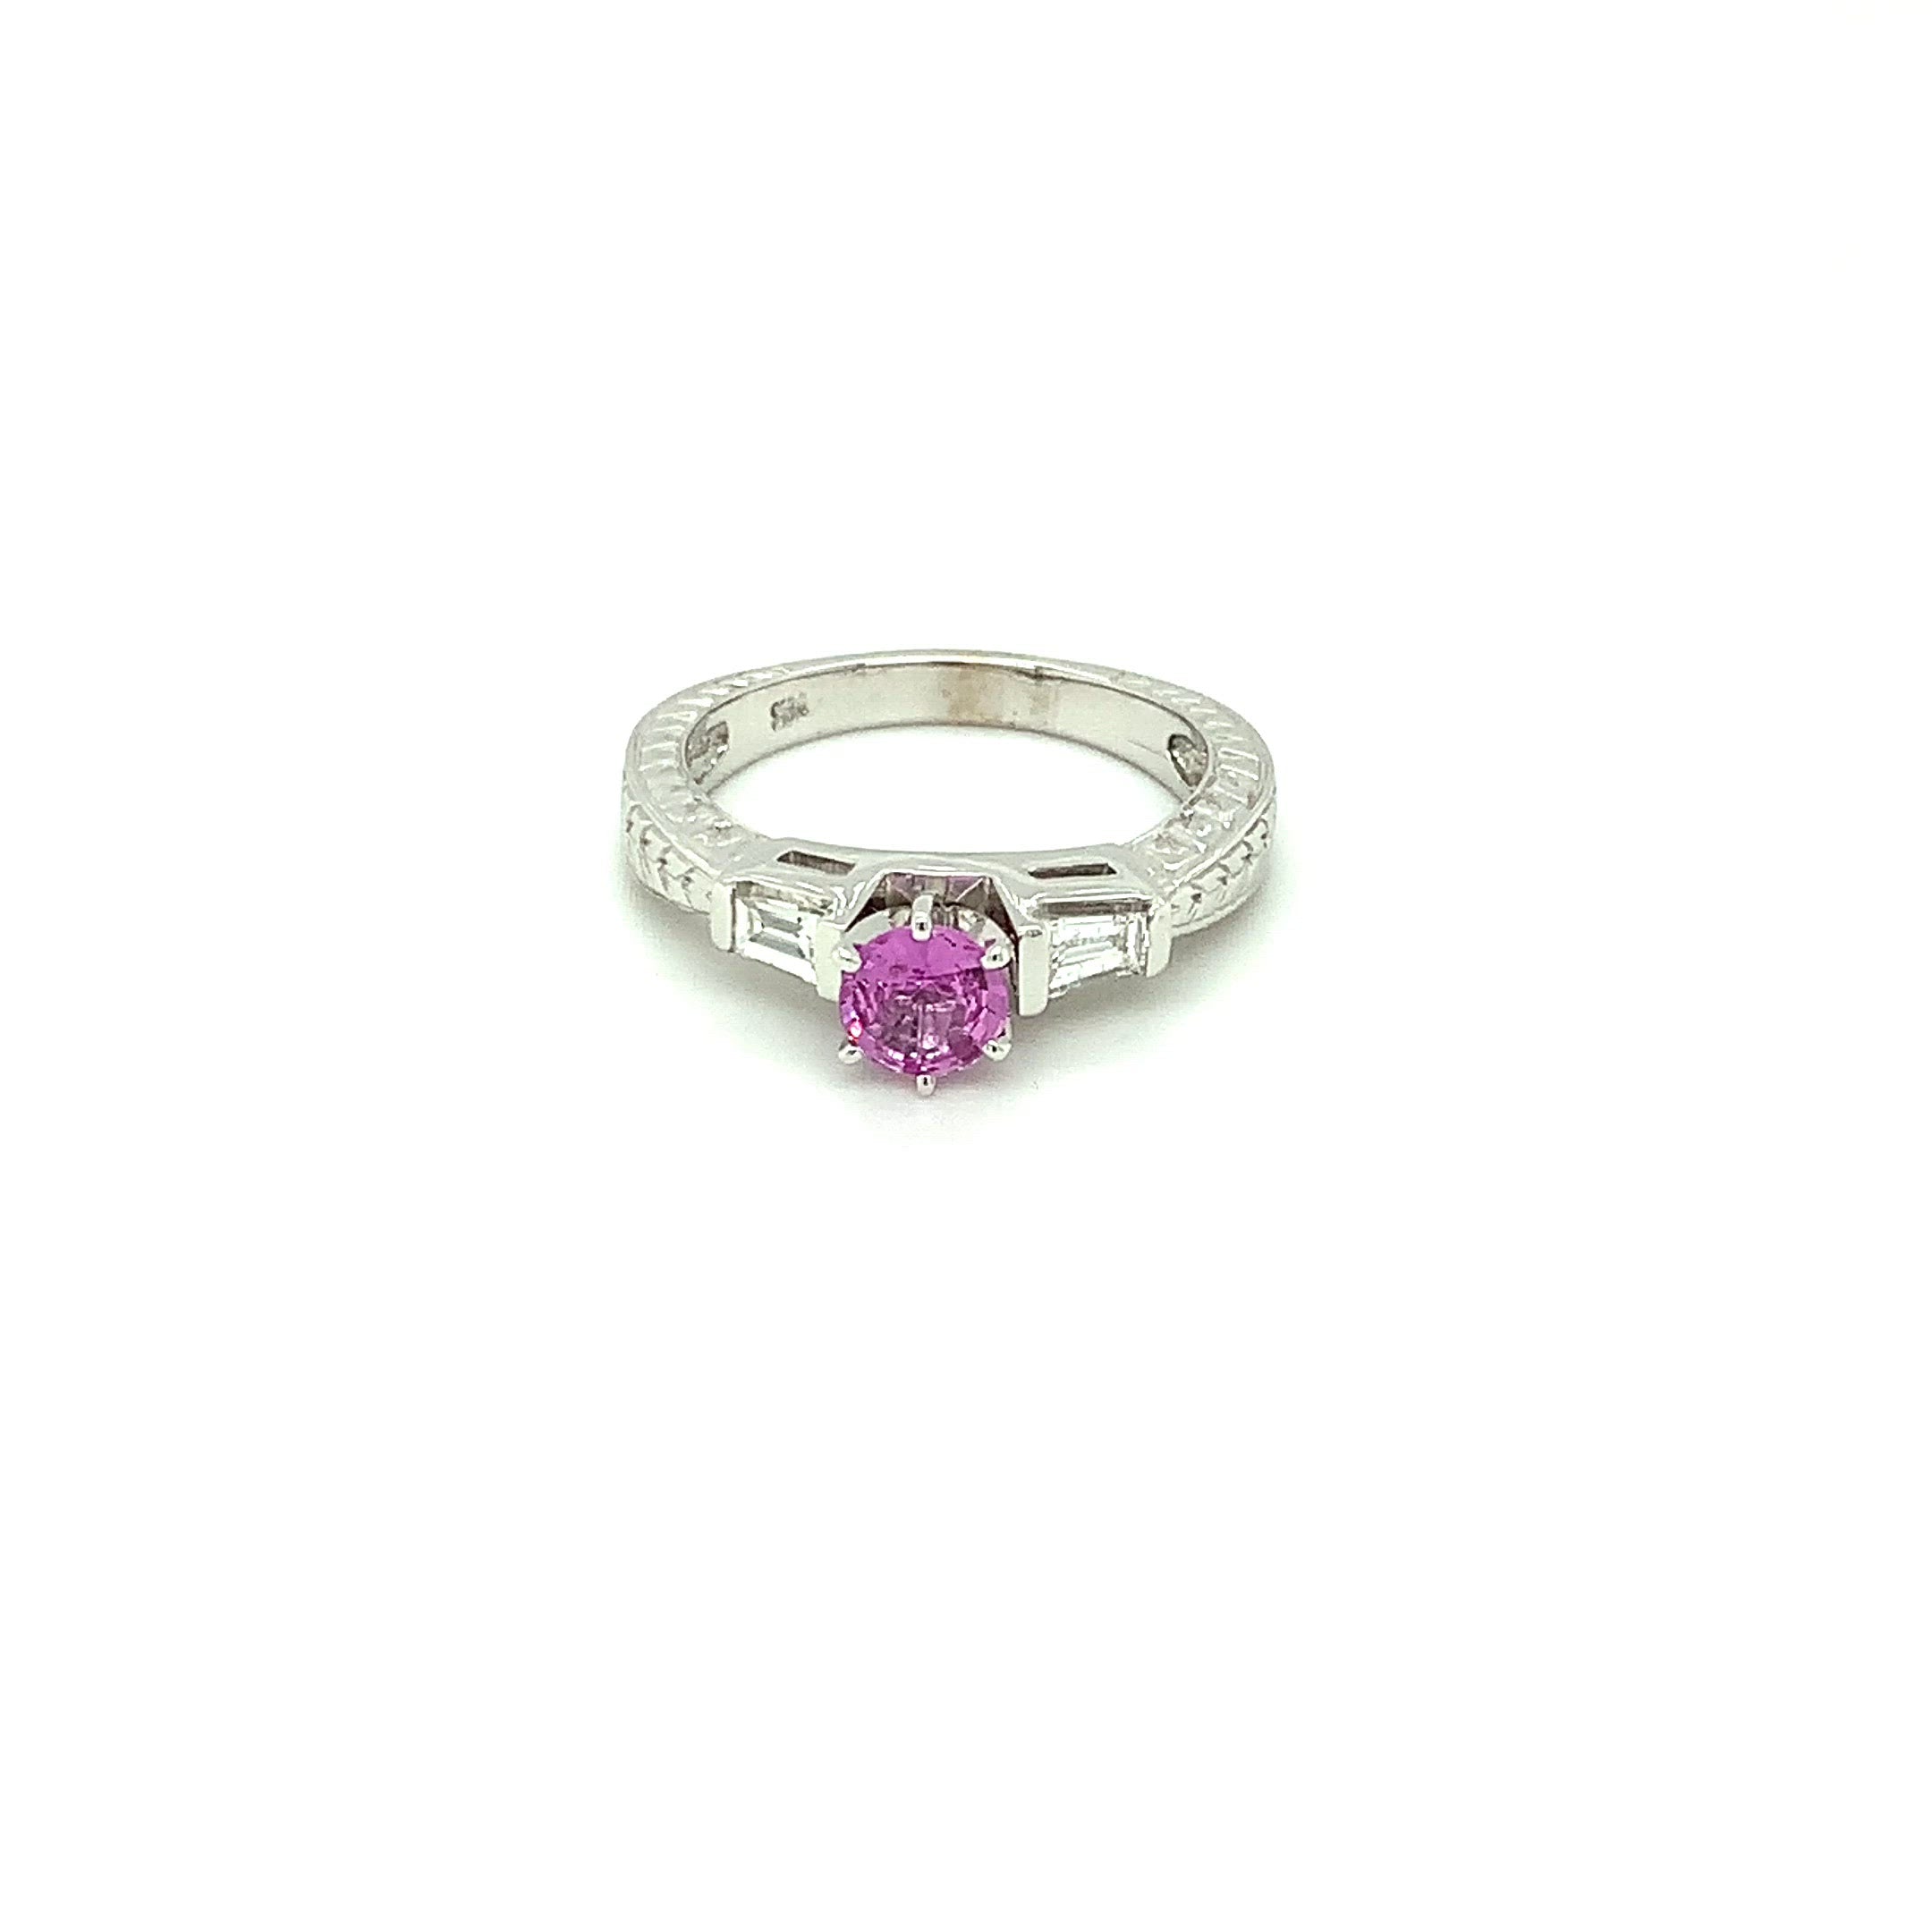 Natural Padparadscha Sapphire & Diamond Ring 14K Solid White Gold 1.30tcw Engagement Ring Pink Ring Gemstone Ring Statement Ring Birthstone